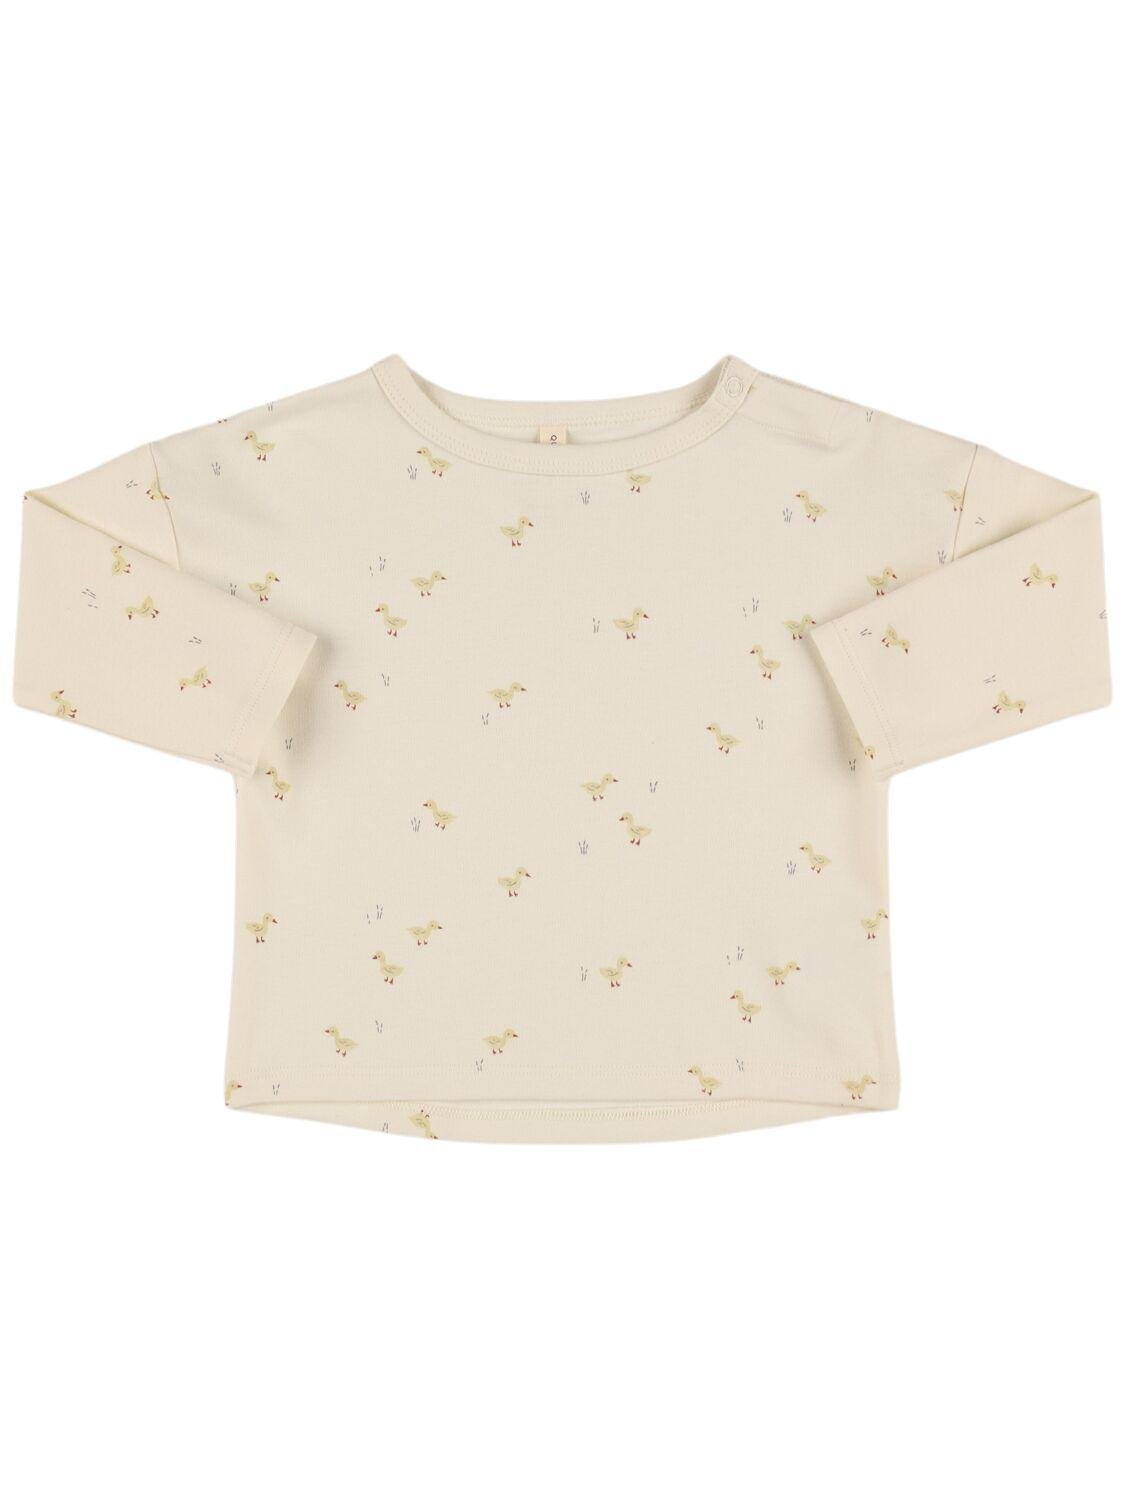 Organic Cotton Jersey T-shirt by QUINCY MAE